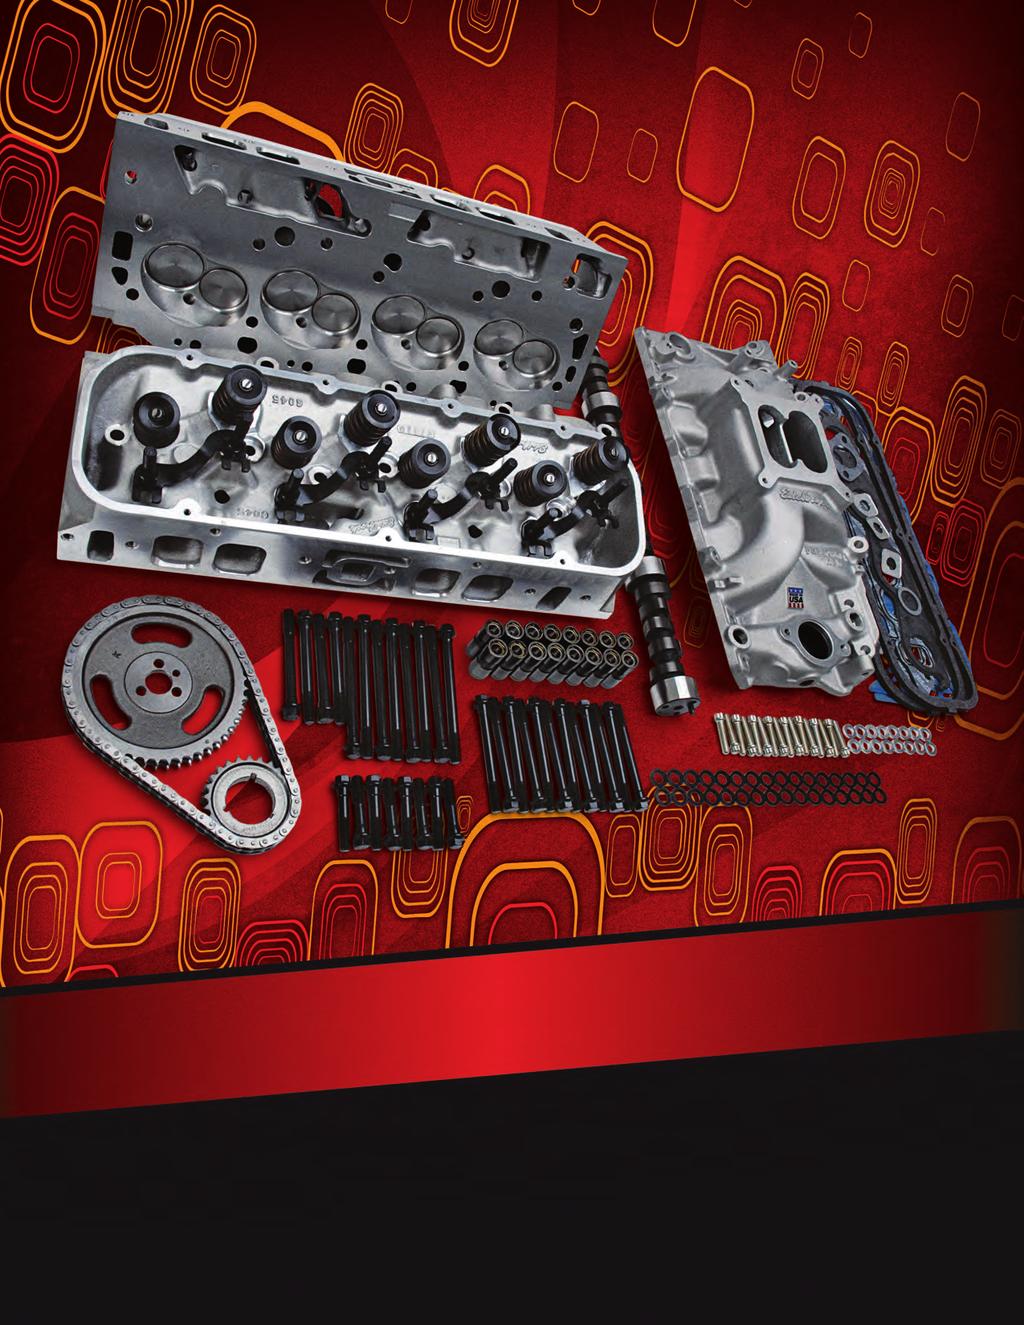 PROUDLY MADE IN THE USA CAMSHAFT & LIFTER KITS CARBURETORS CRATE ENGINES CYLINDER HEADS DATA ACQUISITION